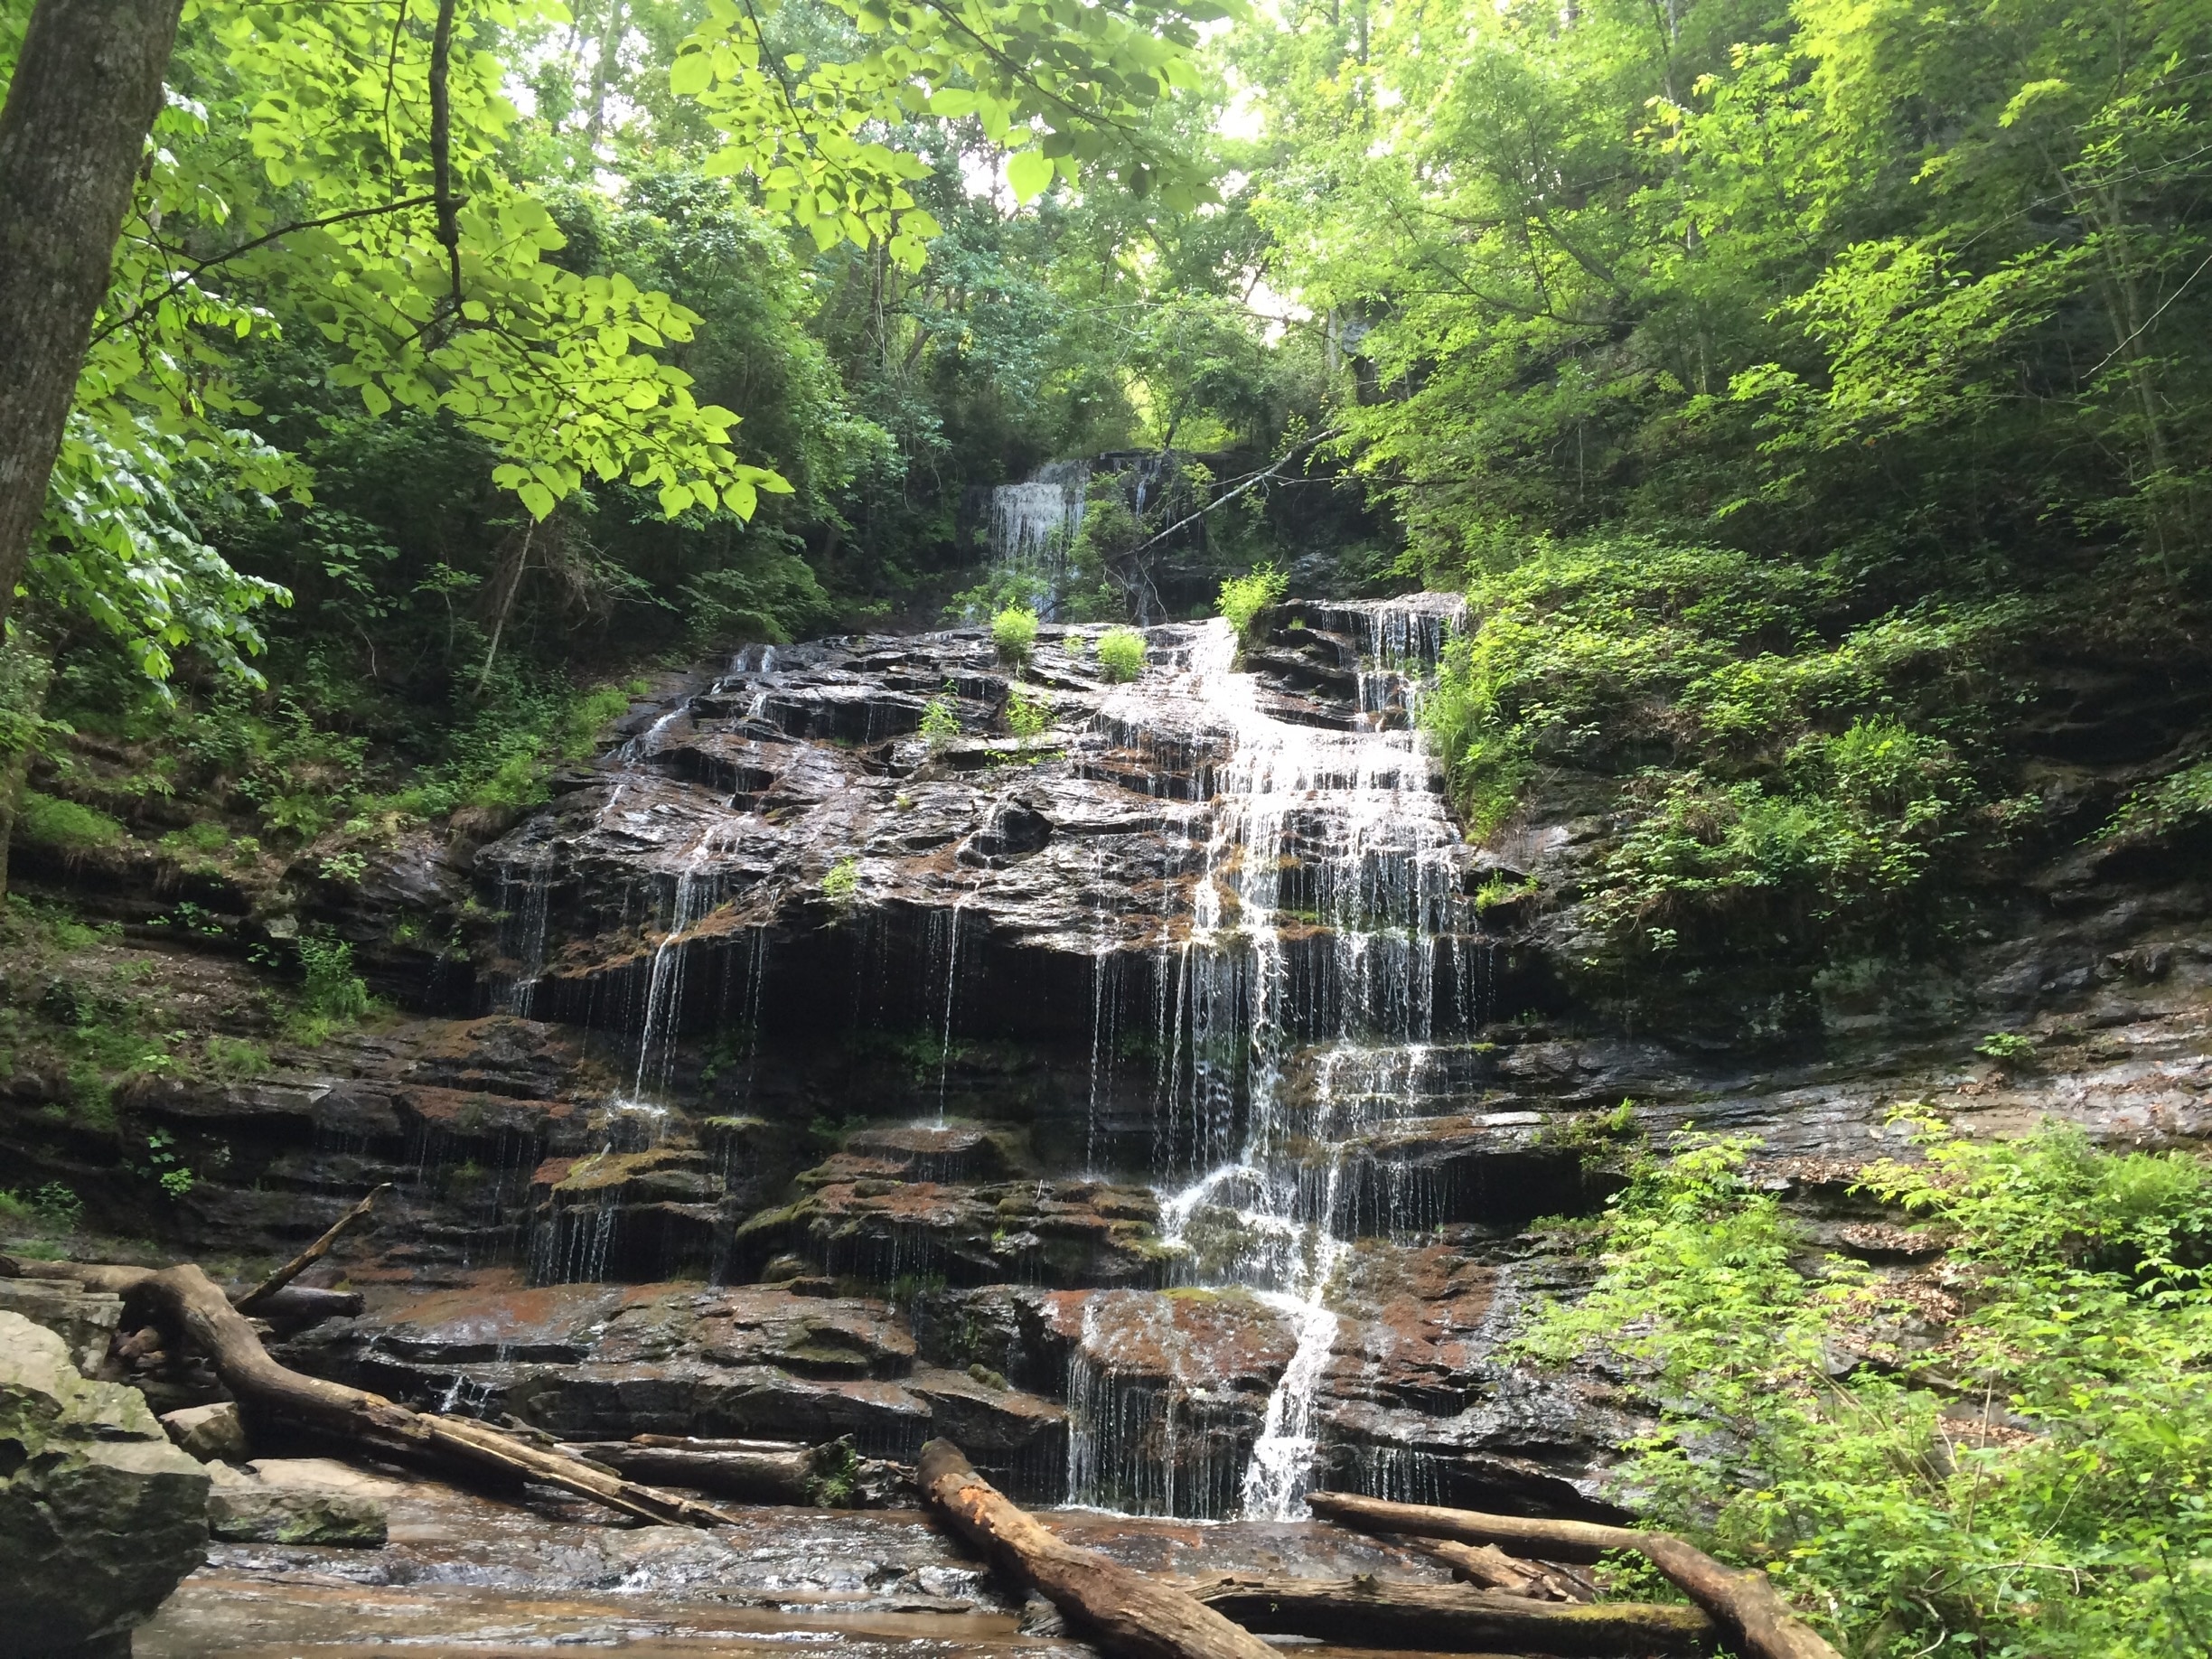 Station Cove Falls is at the end of an easy hike, known as Oconee Station.